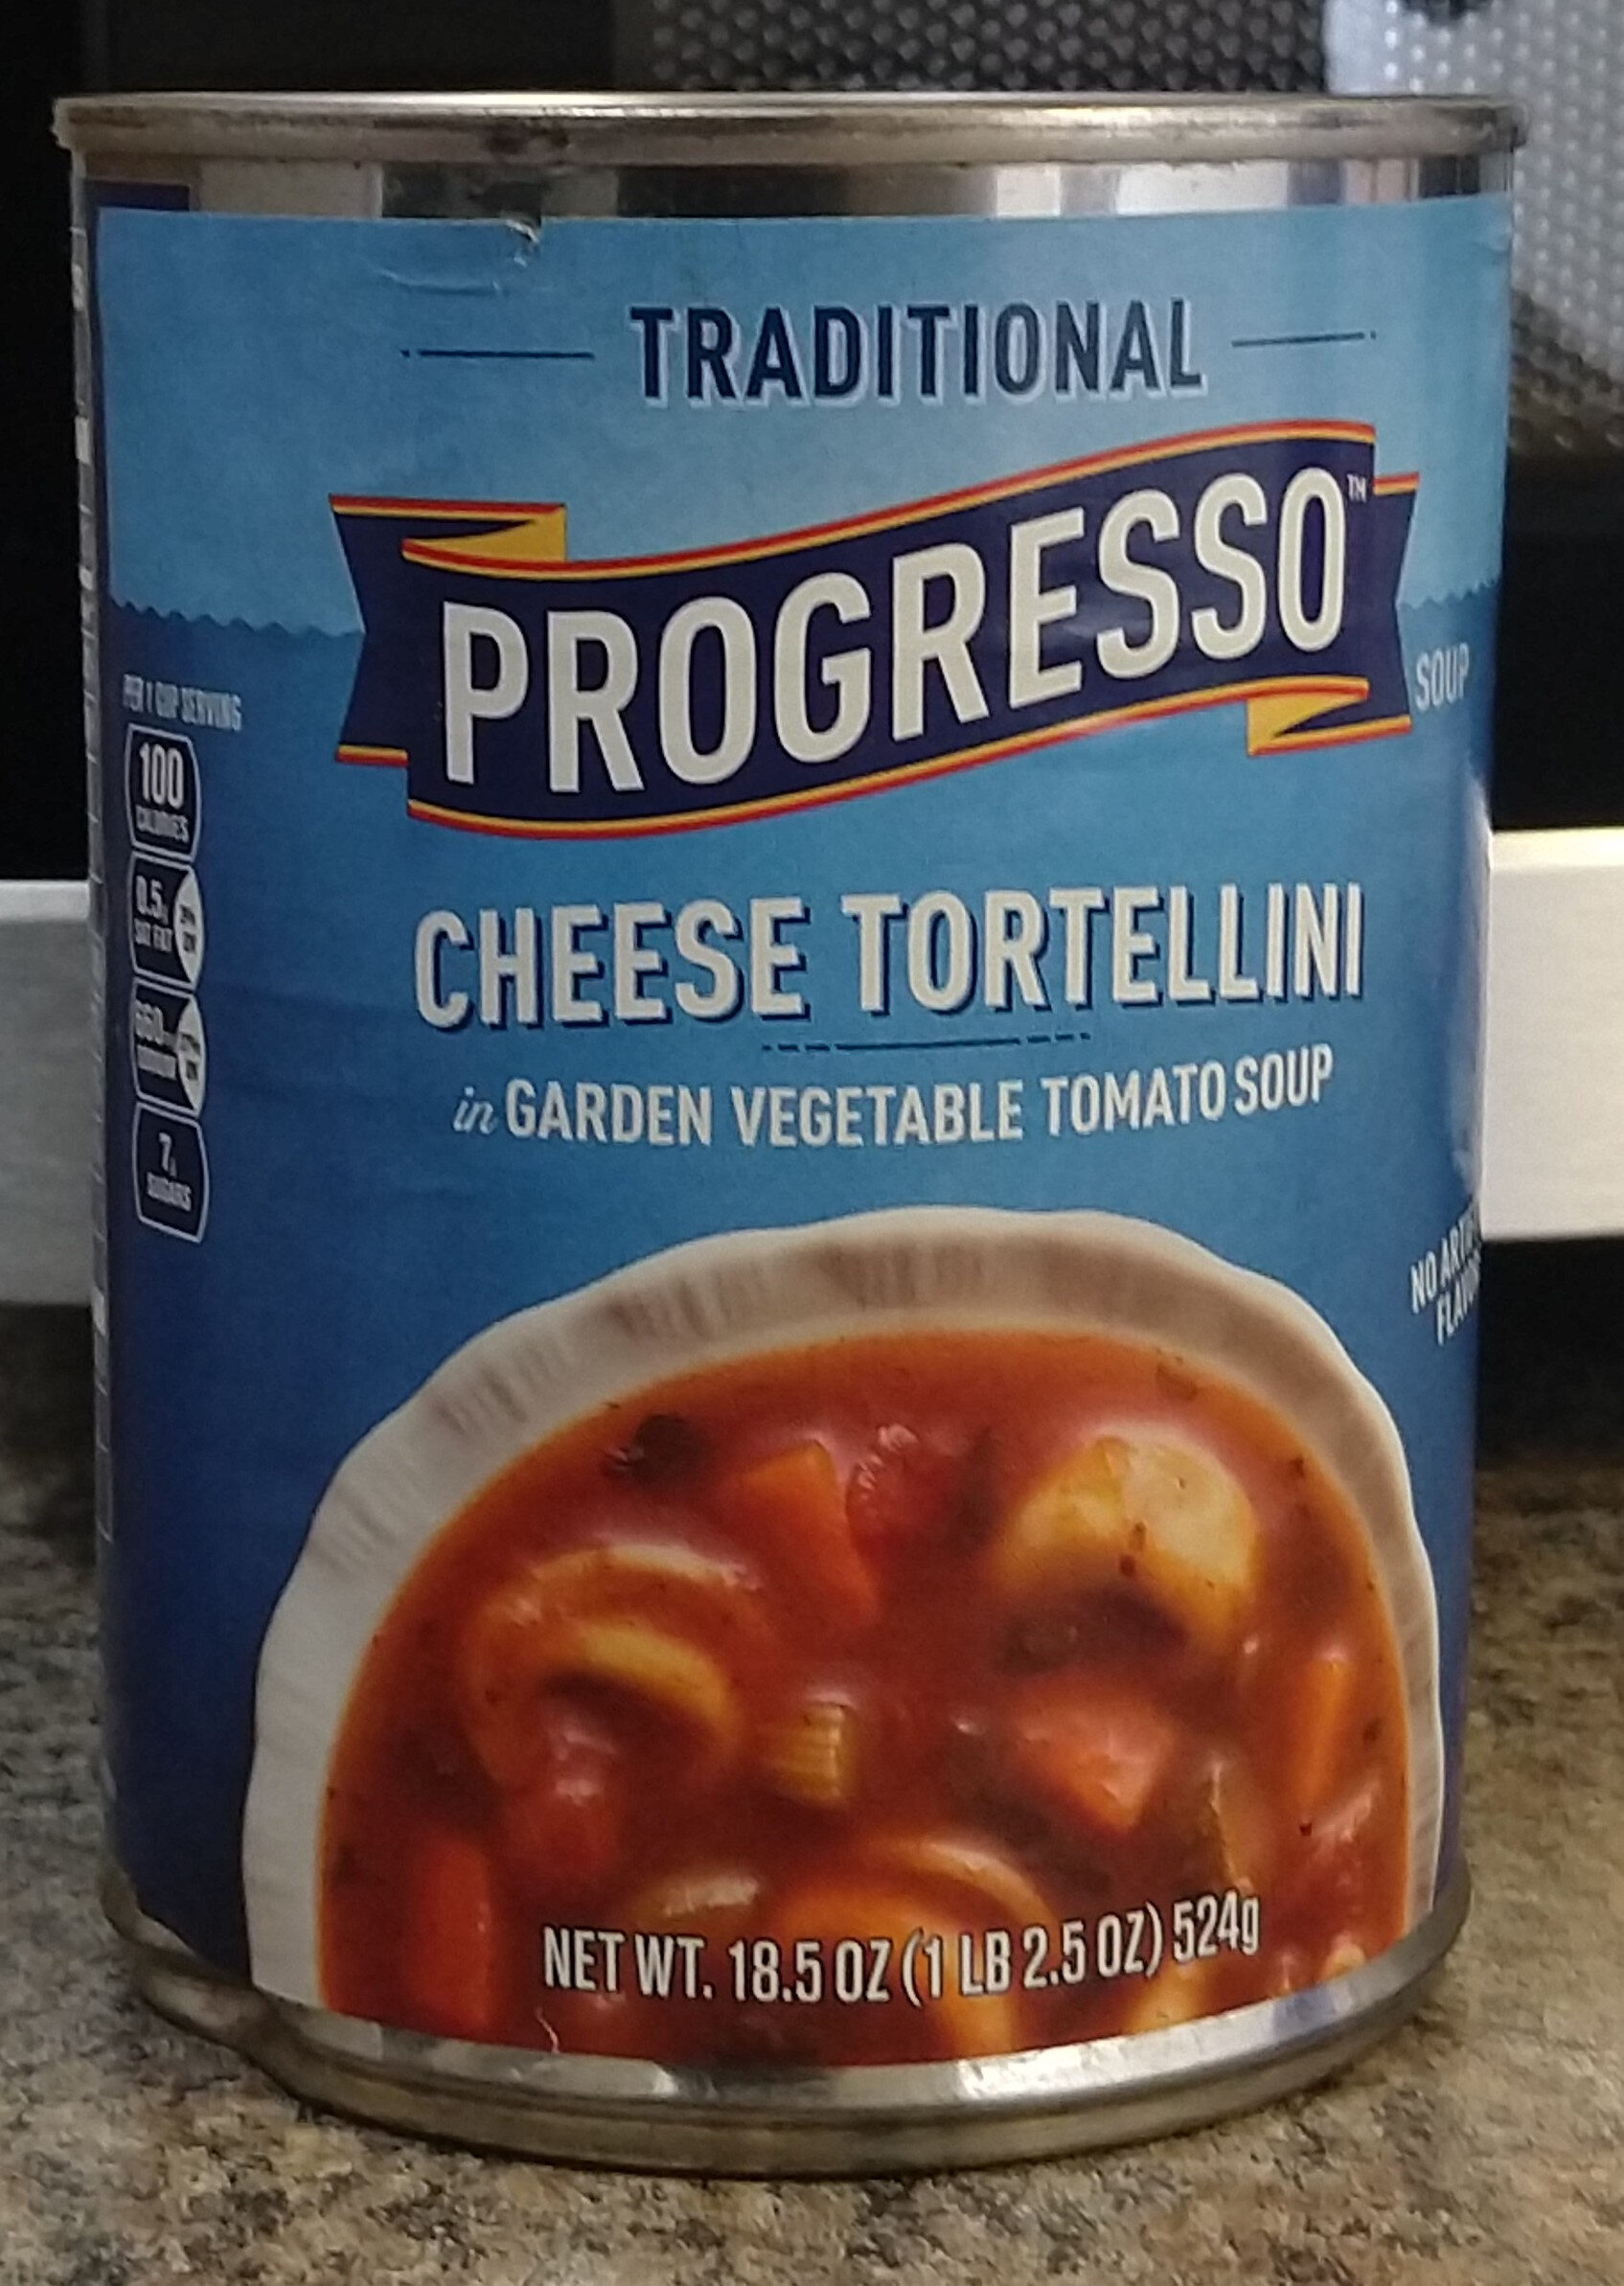 Progresso Traditional Cheese Tortellini in Garden Vegetable Tomato Soup - Product